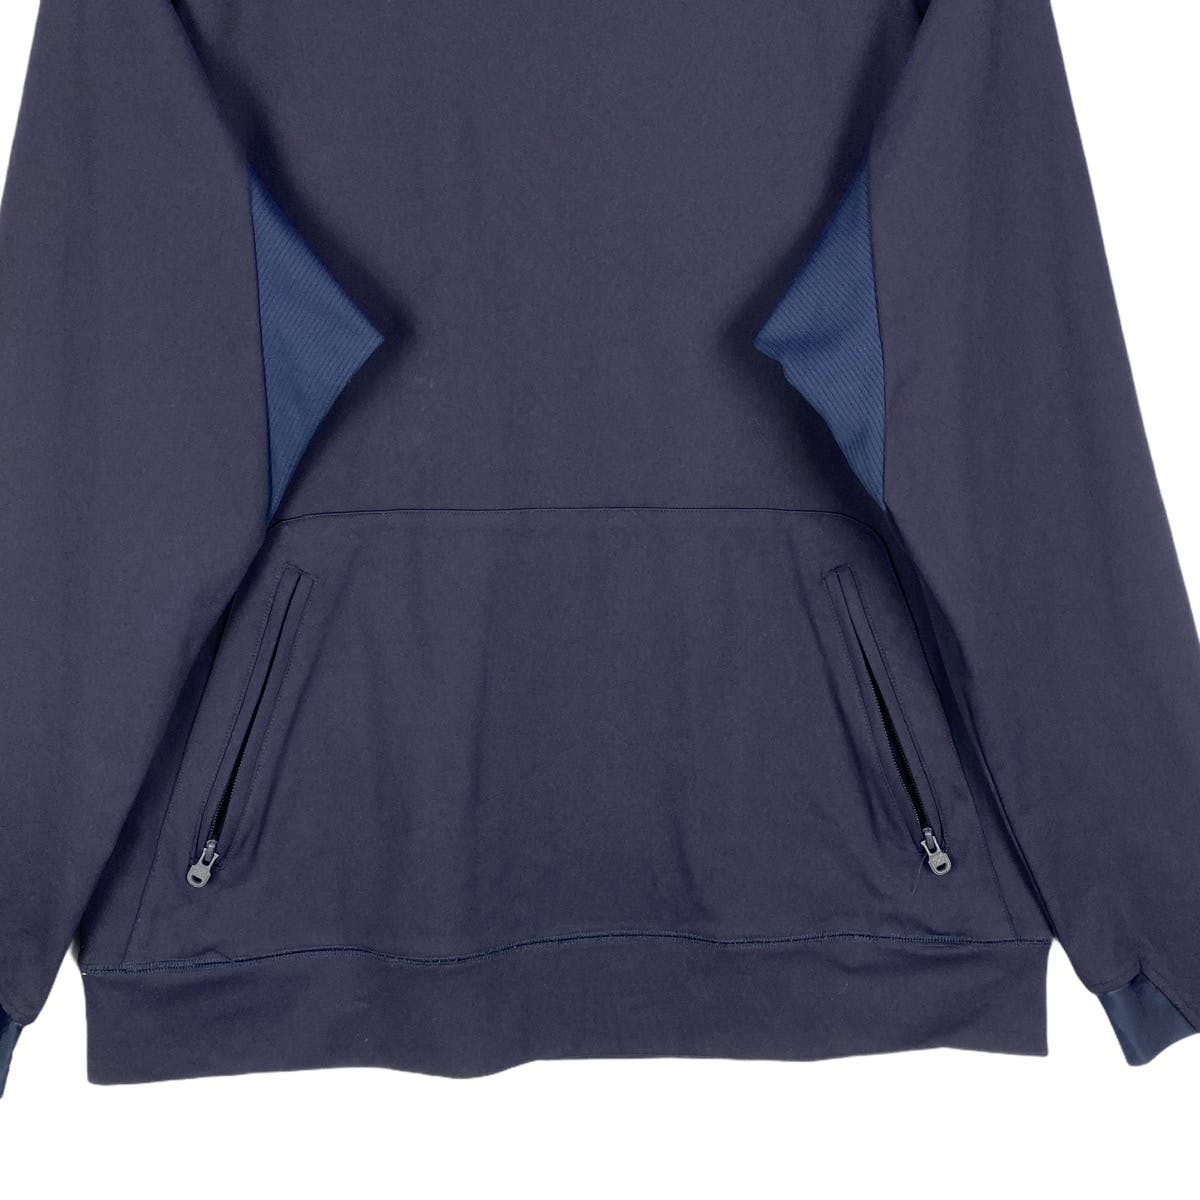 White Mountaineering SS 2016 Collection Sweatshirt - 6